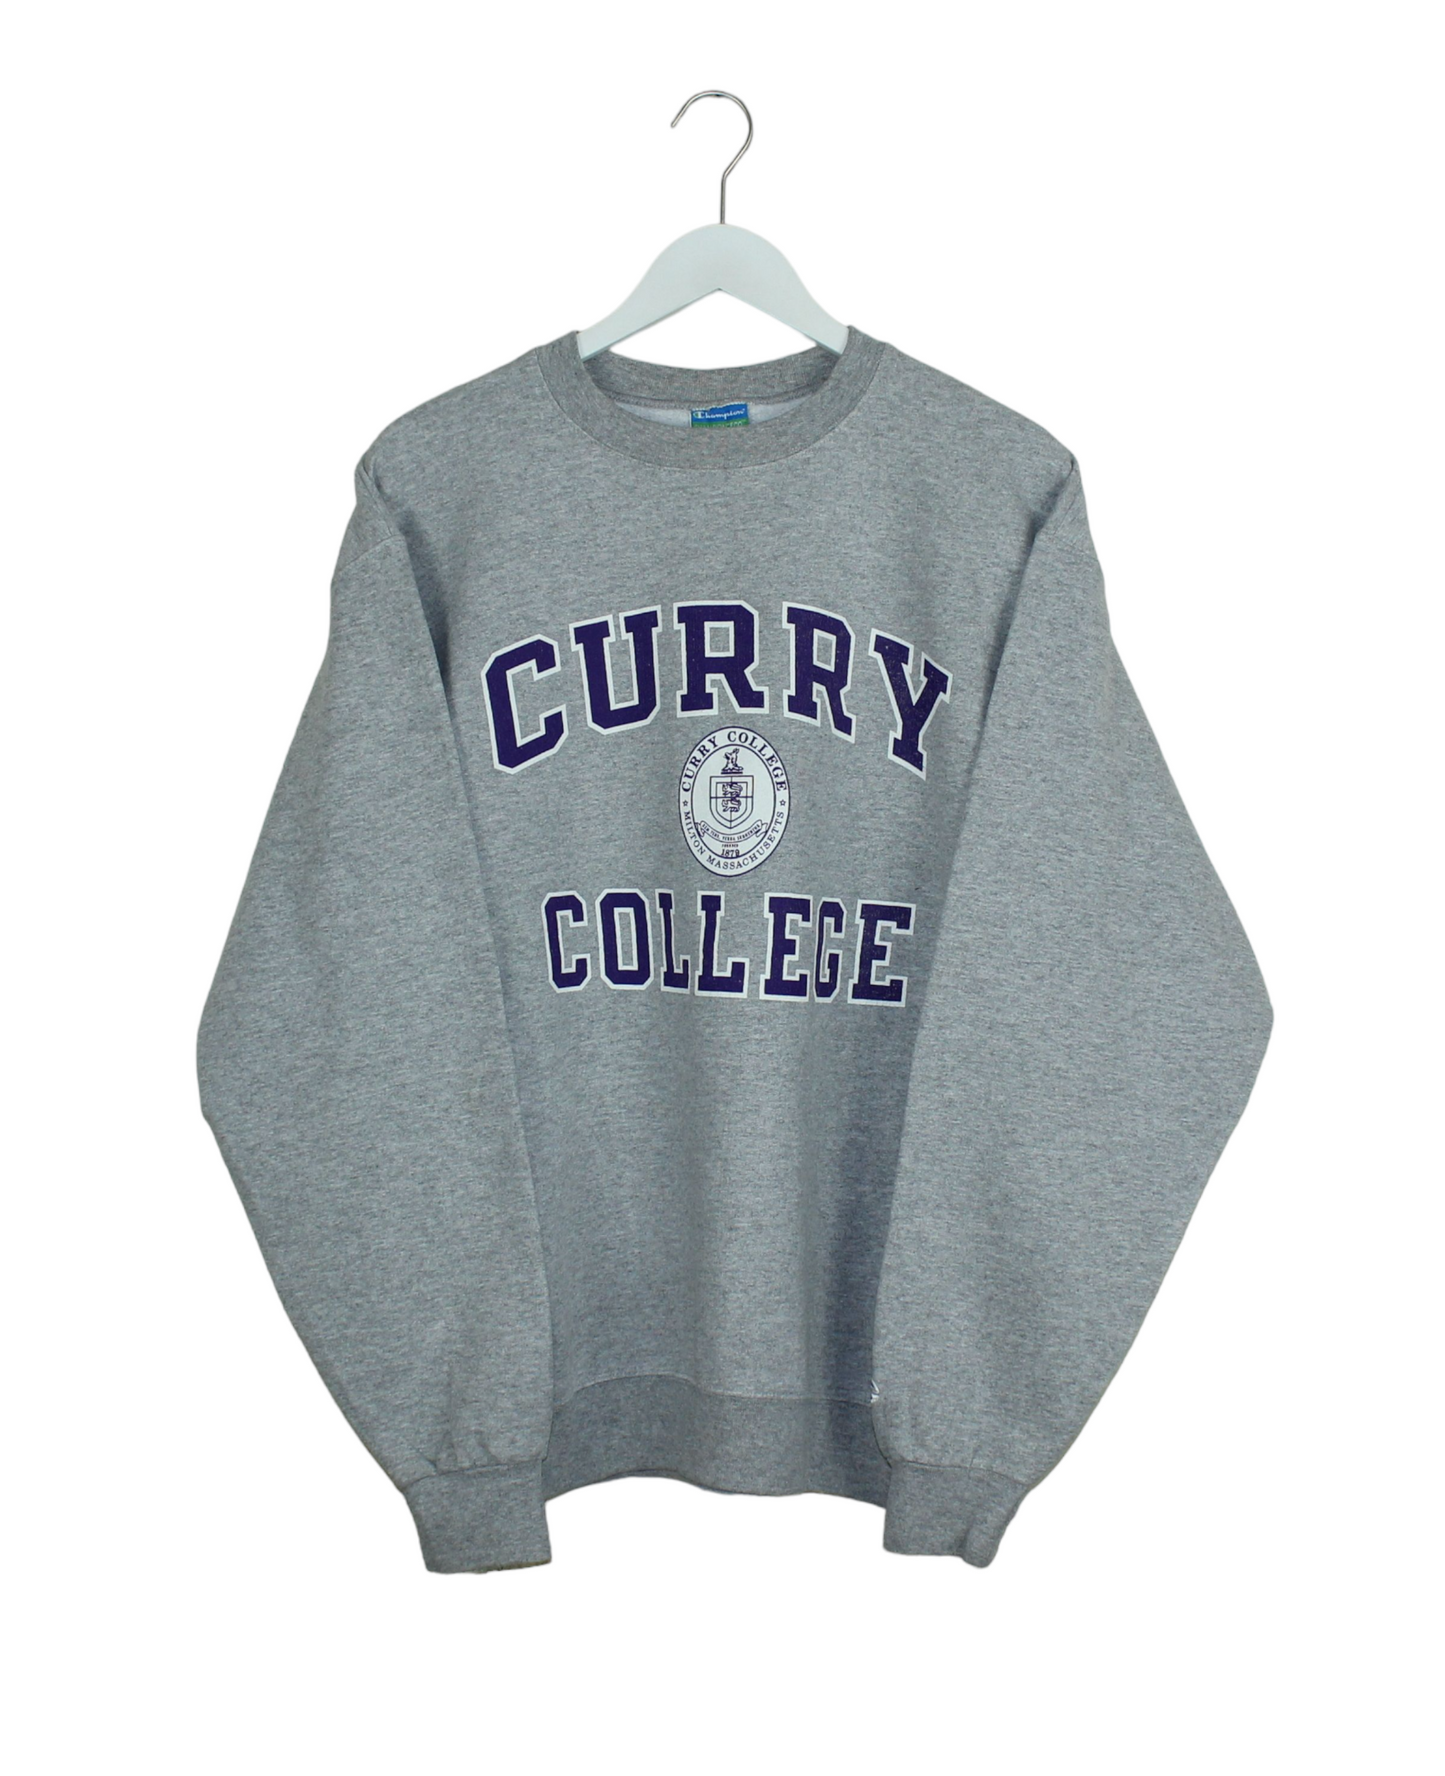 Champion Curry College Sweater